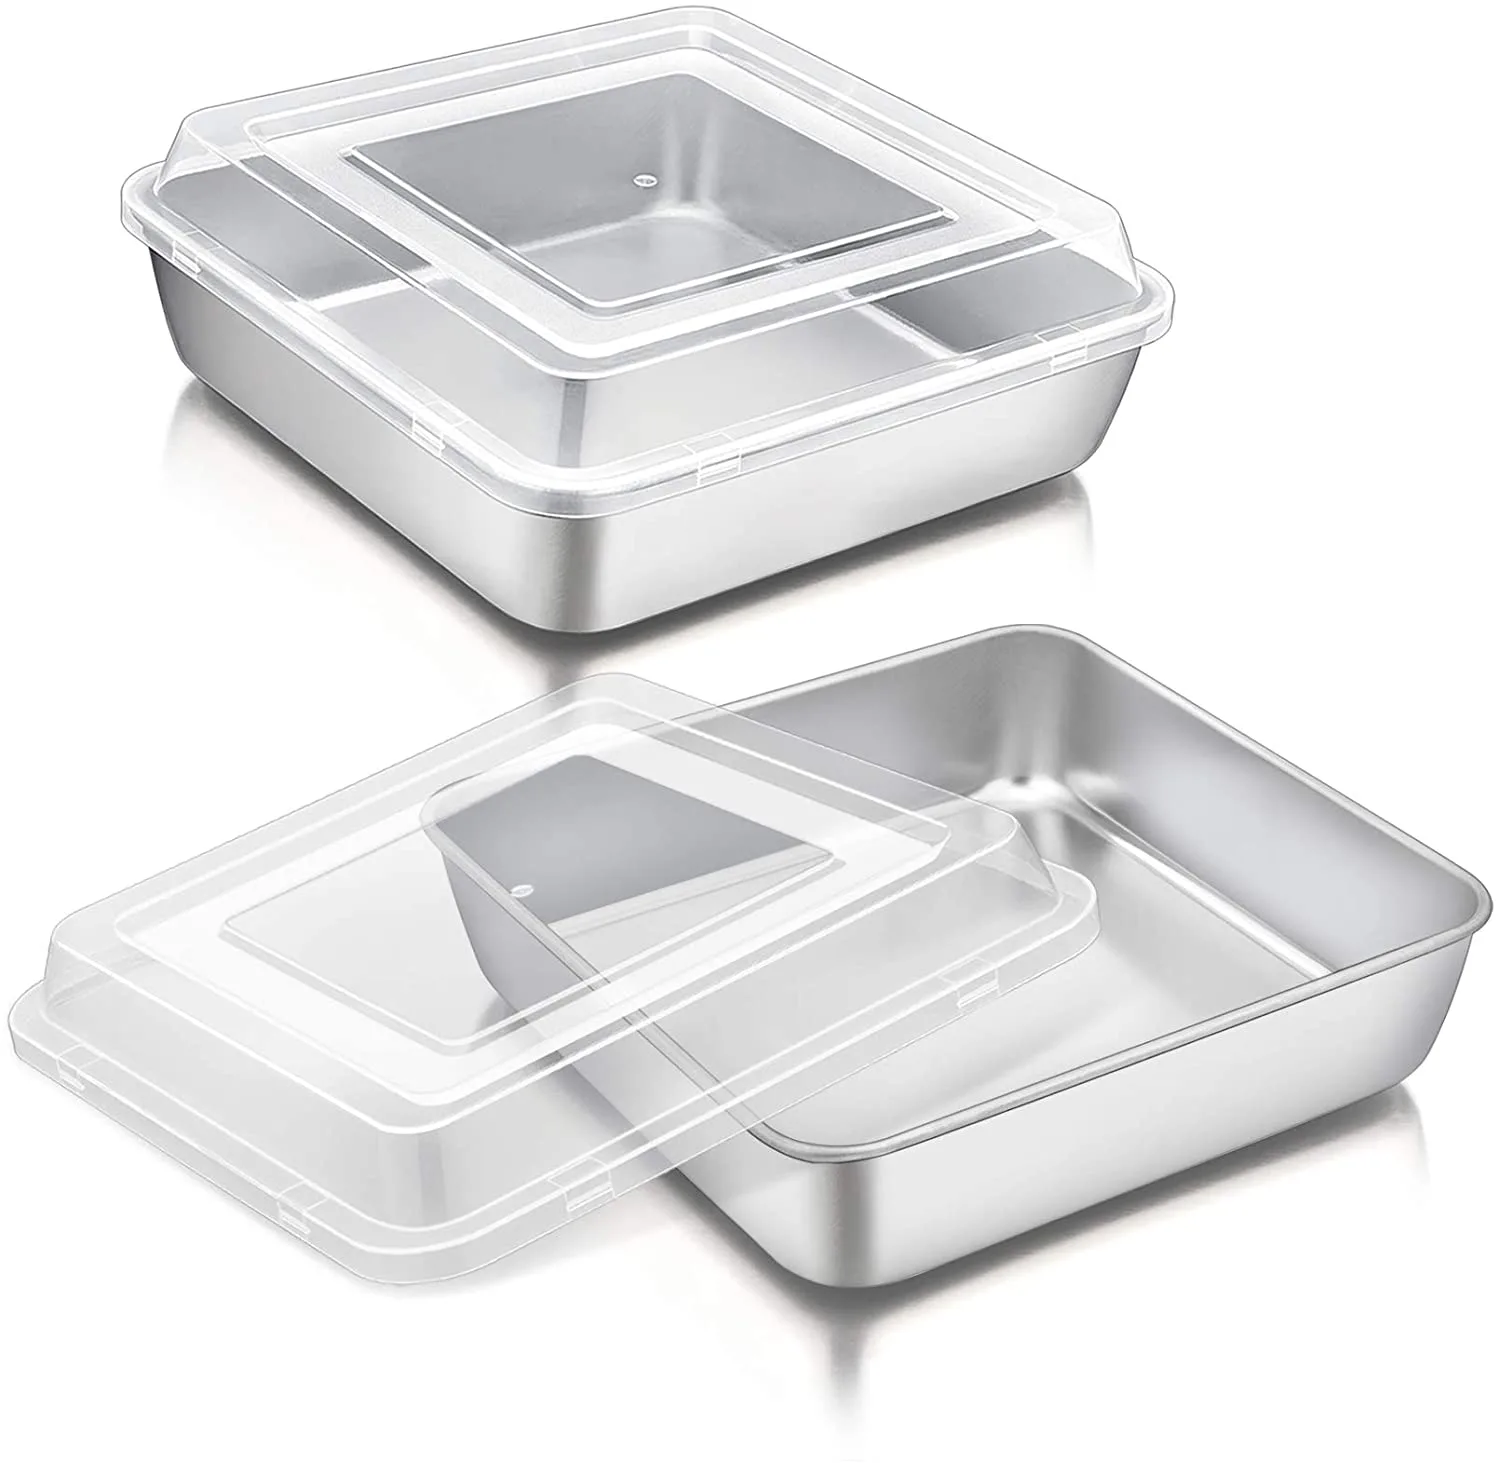 8 Inch Square Cake Pan with Lid